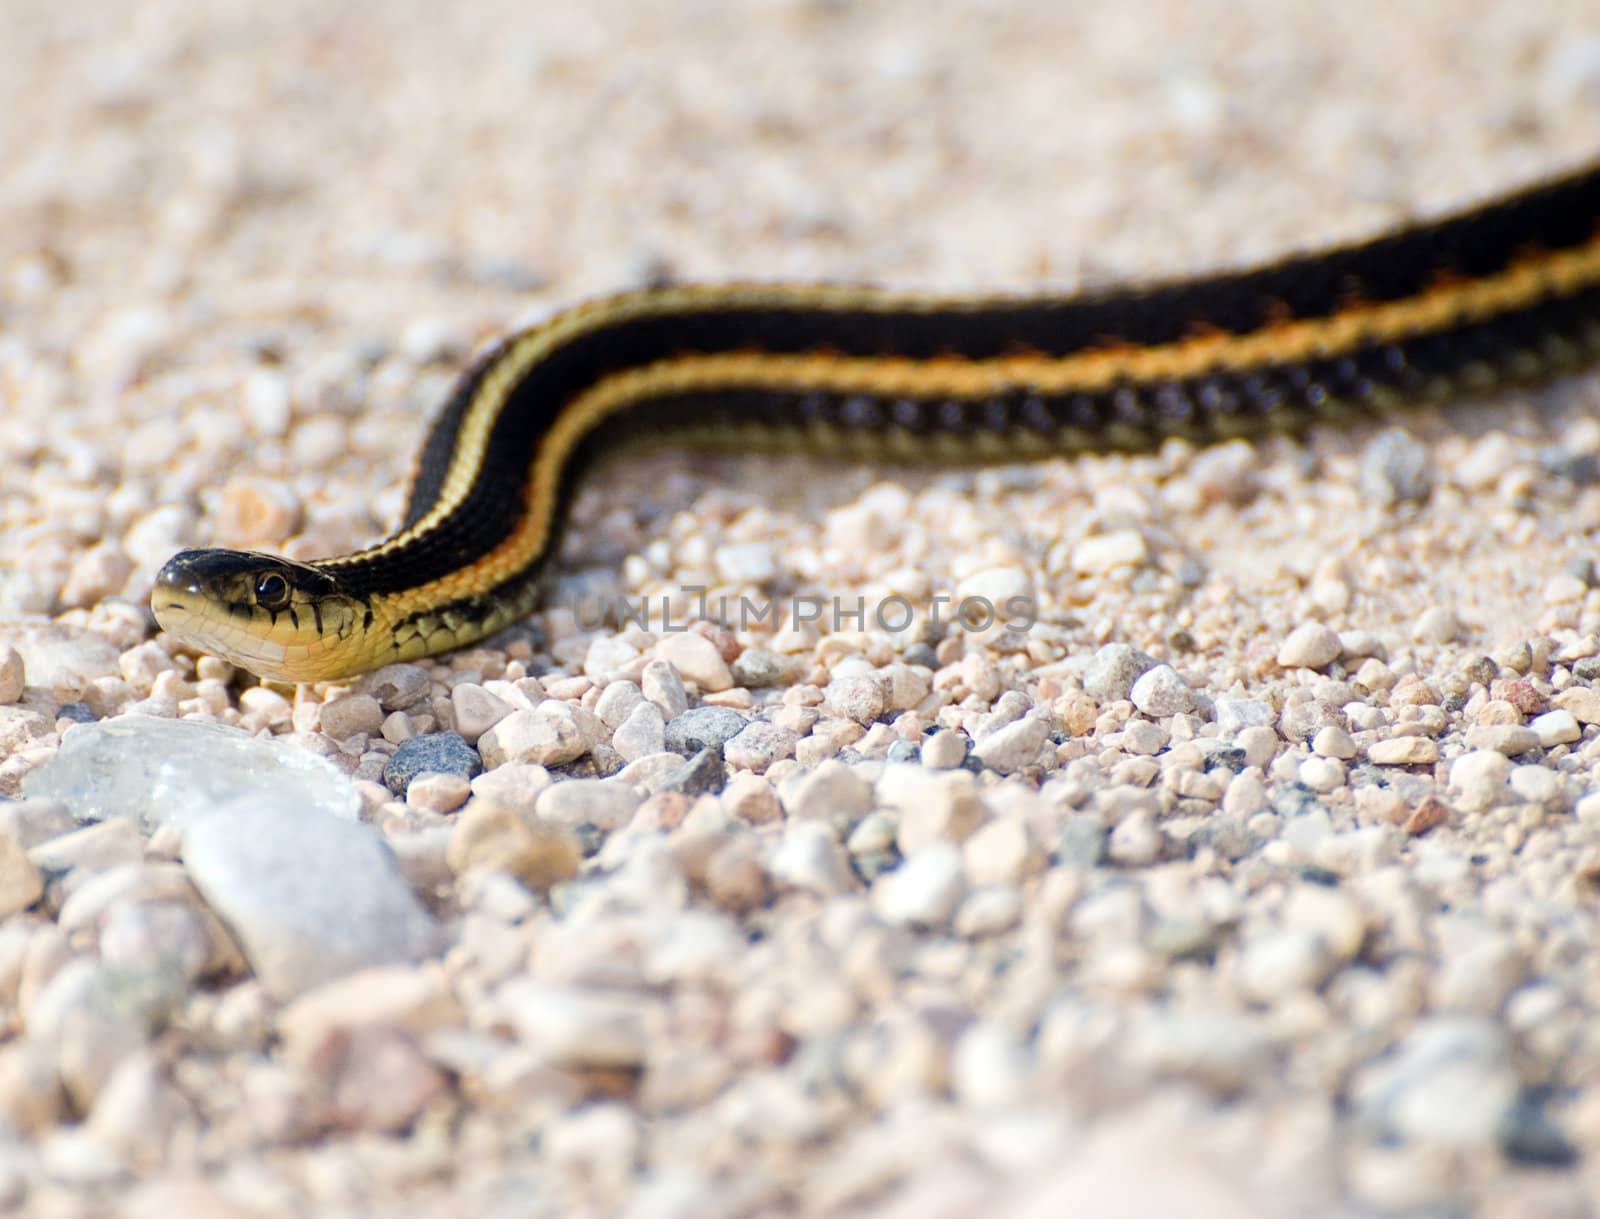 Closeup view of a garter snake slithering across some stones outside